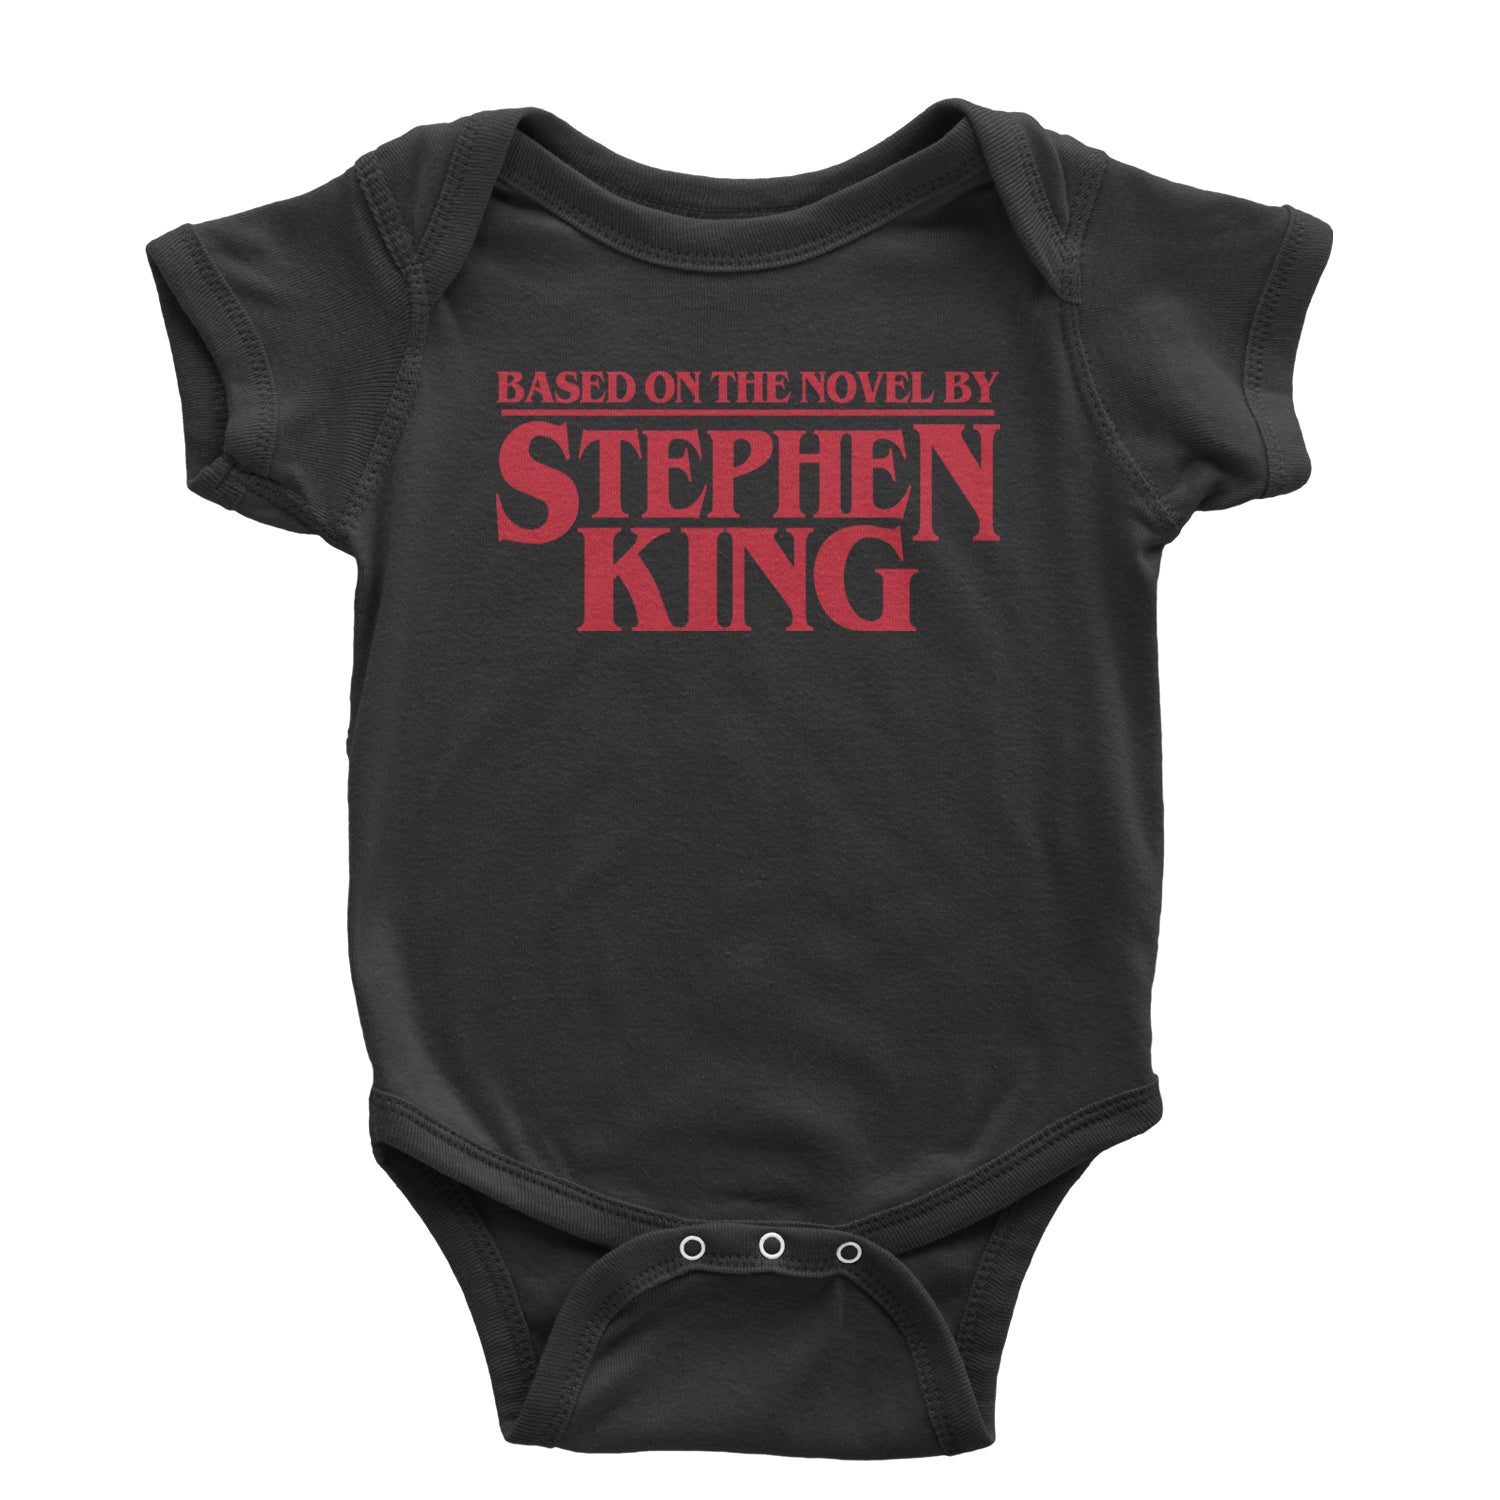 Based On The Novel By Stephen King Infant One-Piece Romper Bodysuit and Toddler T-shirt